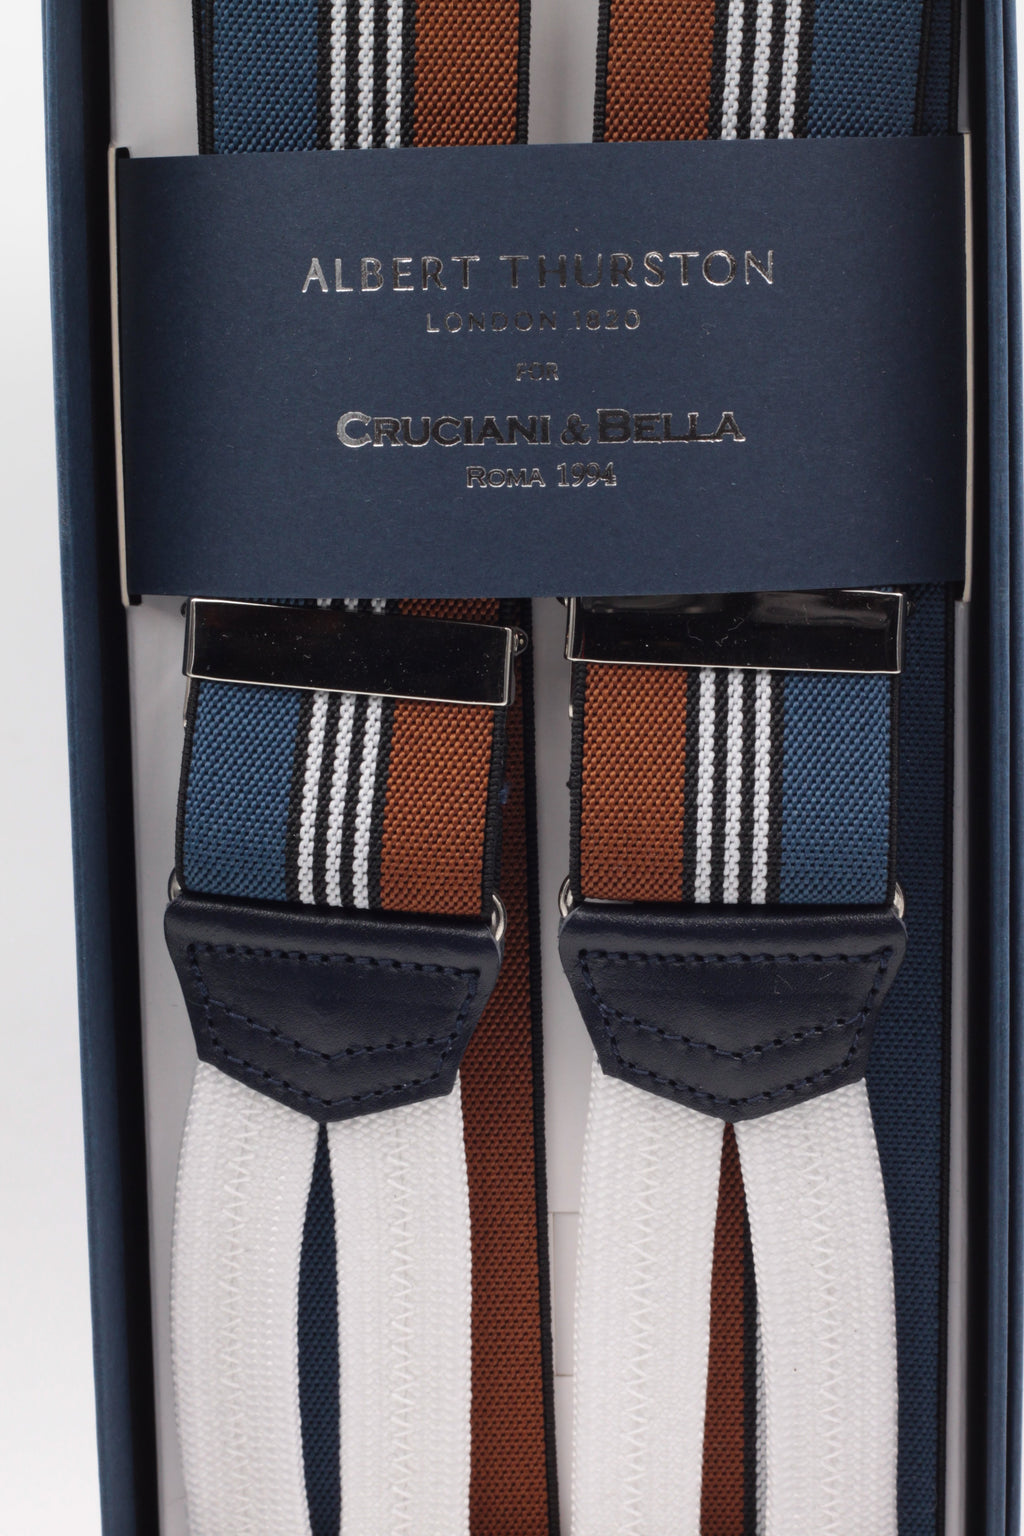 Albert Thurston for Cruciani & Bella Made in England Adjustable Sizing 35 mm elastic Brown and olympic blue, white stripe braces Braid ends Y-Shaped Nickel Fittings Size: L